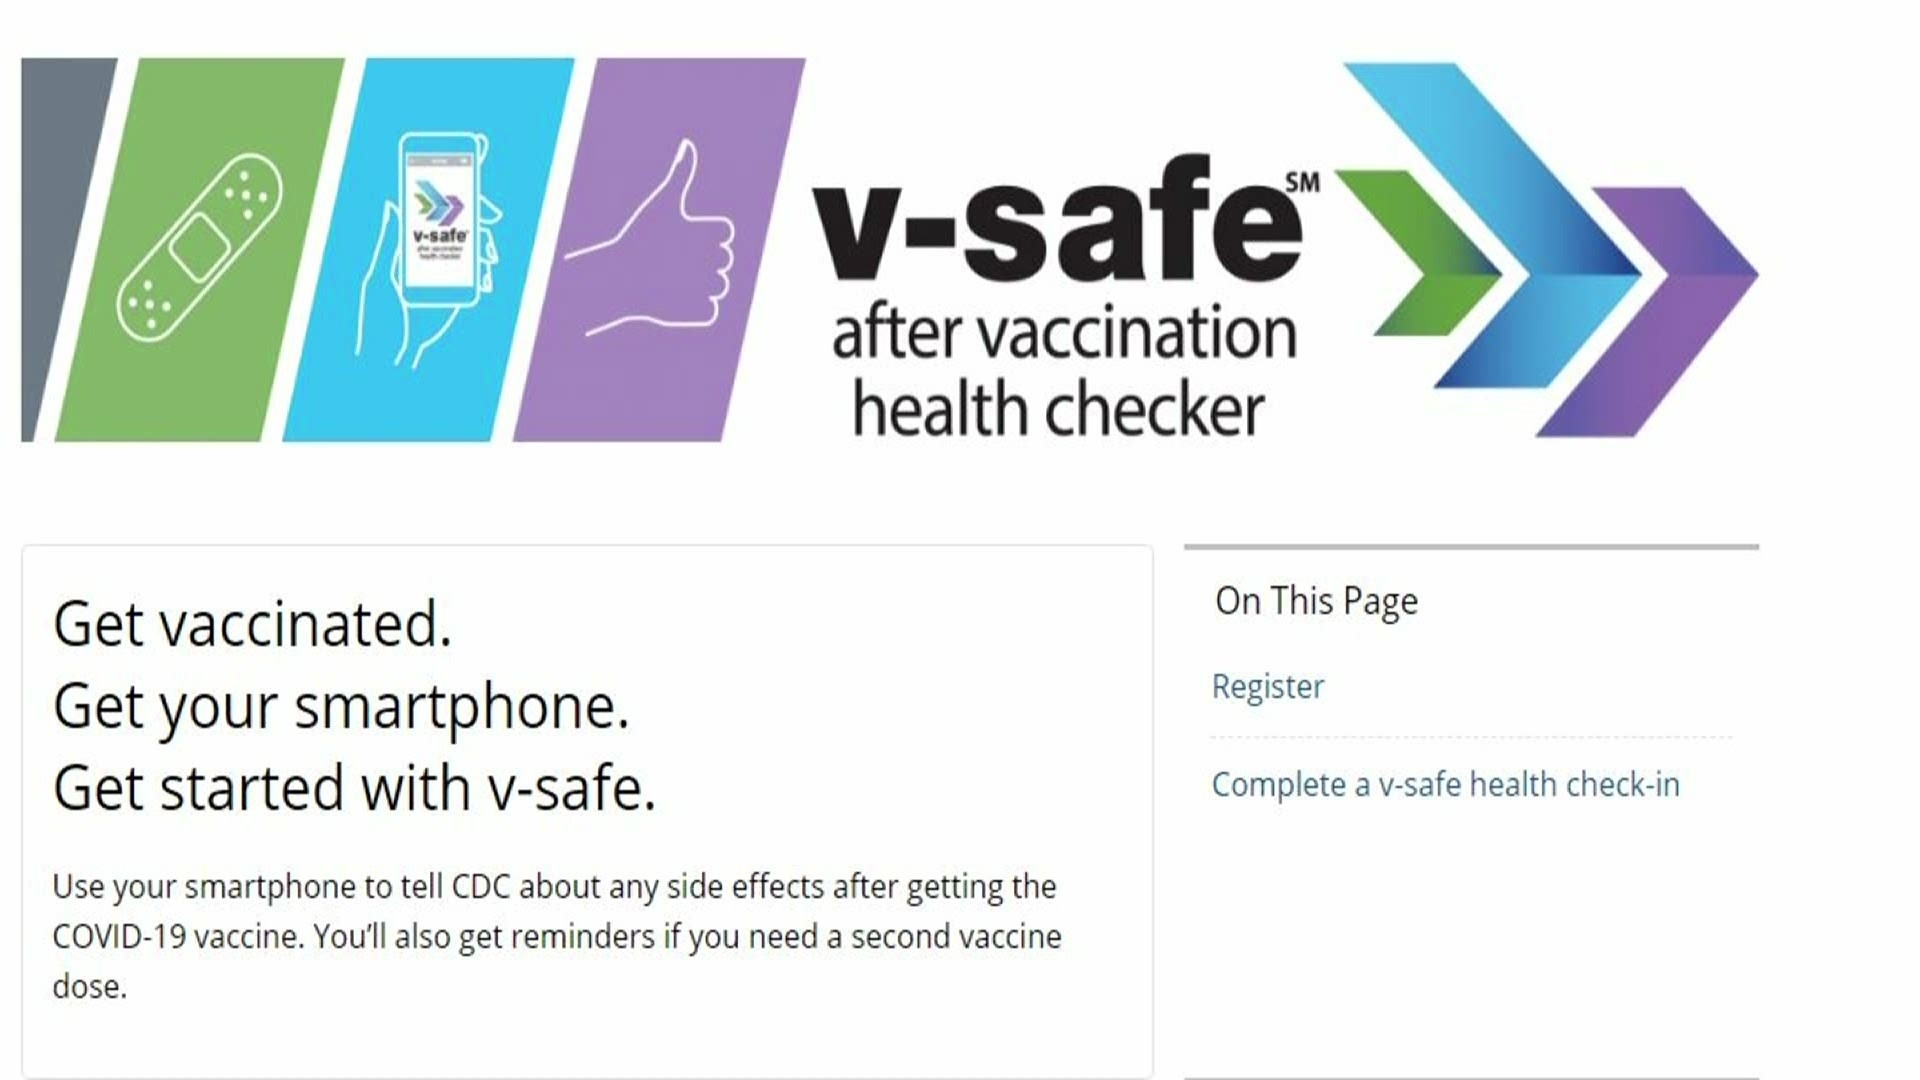 Cdc To Use V-Safe Text Message Tool To Track Covid-19 Vaccine Side Effects